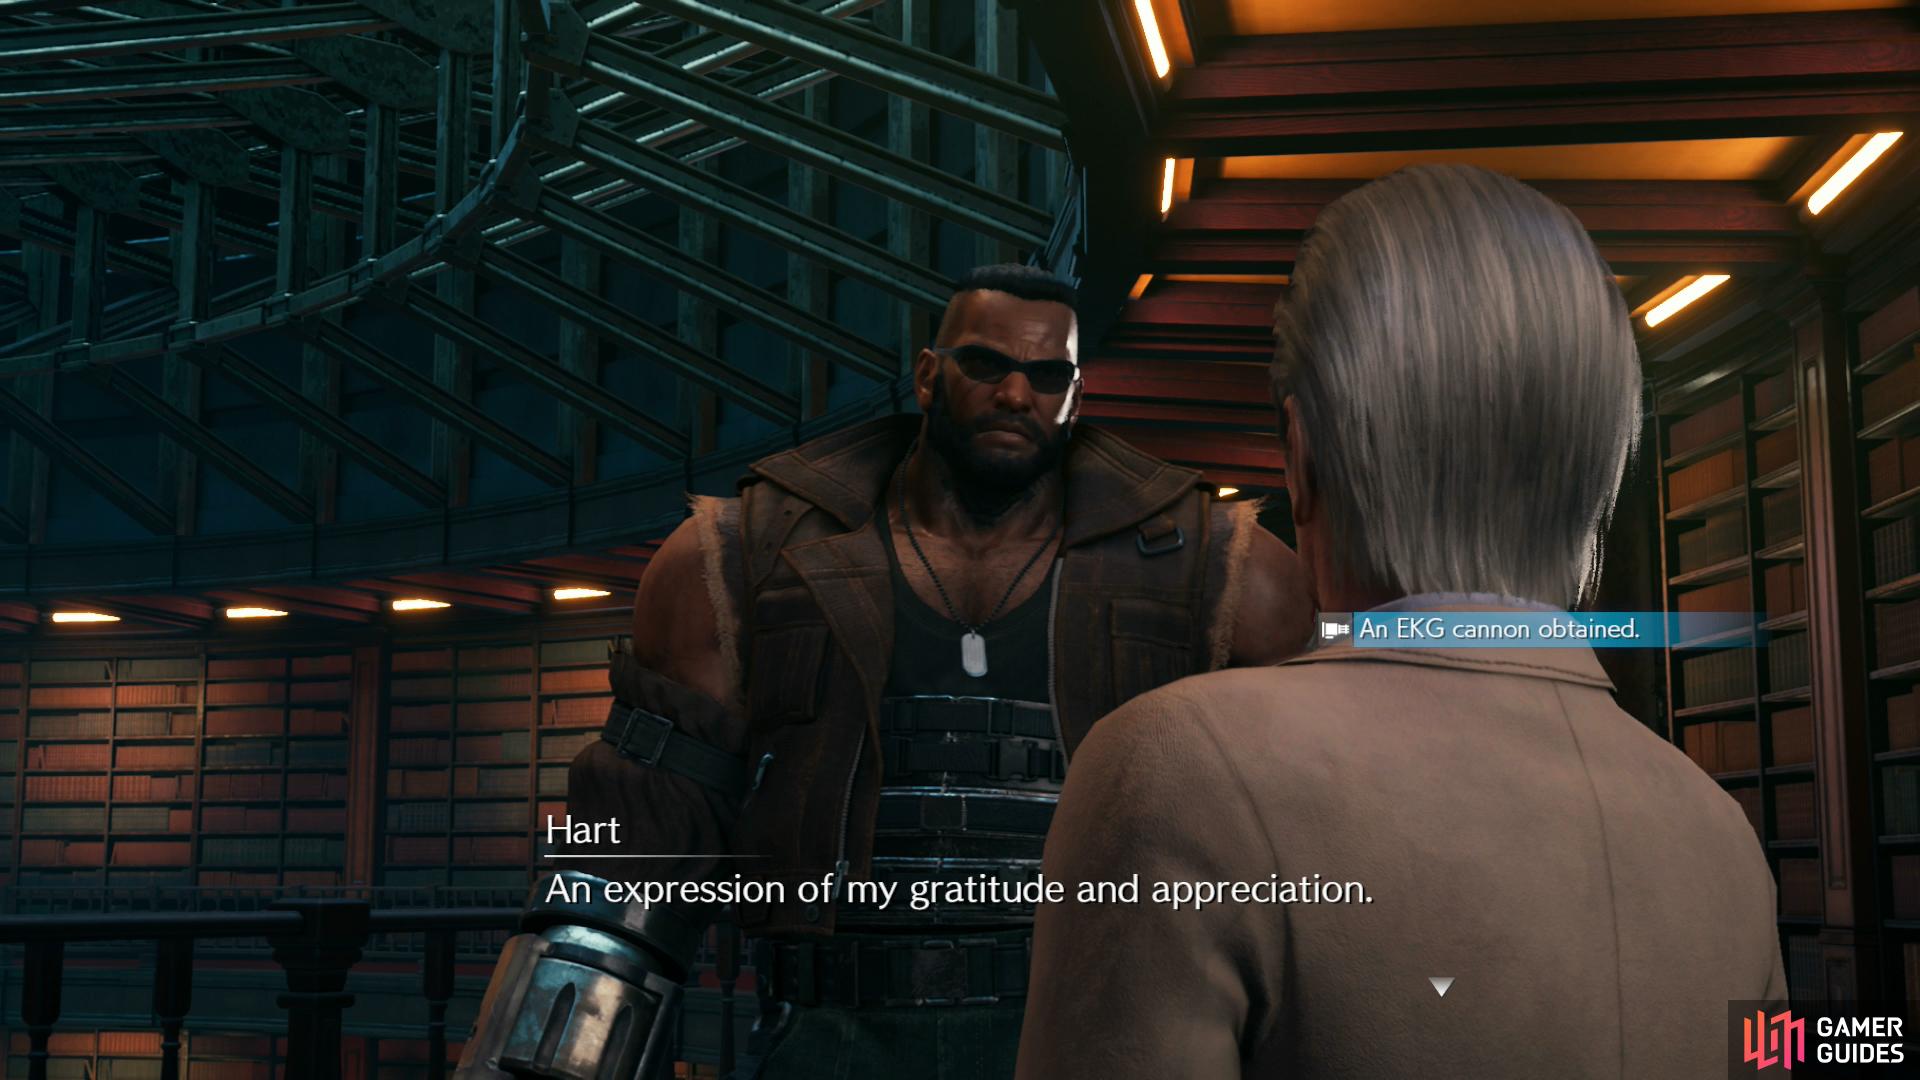 and when Barret's reaction is negative, he'll give you the EKG Cannon.